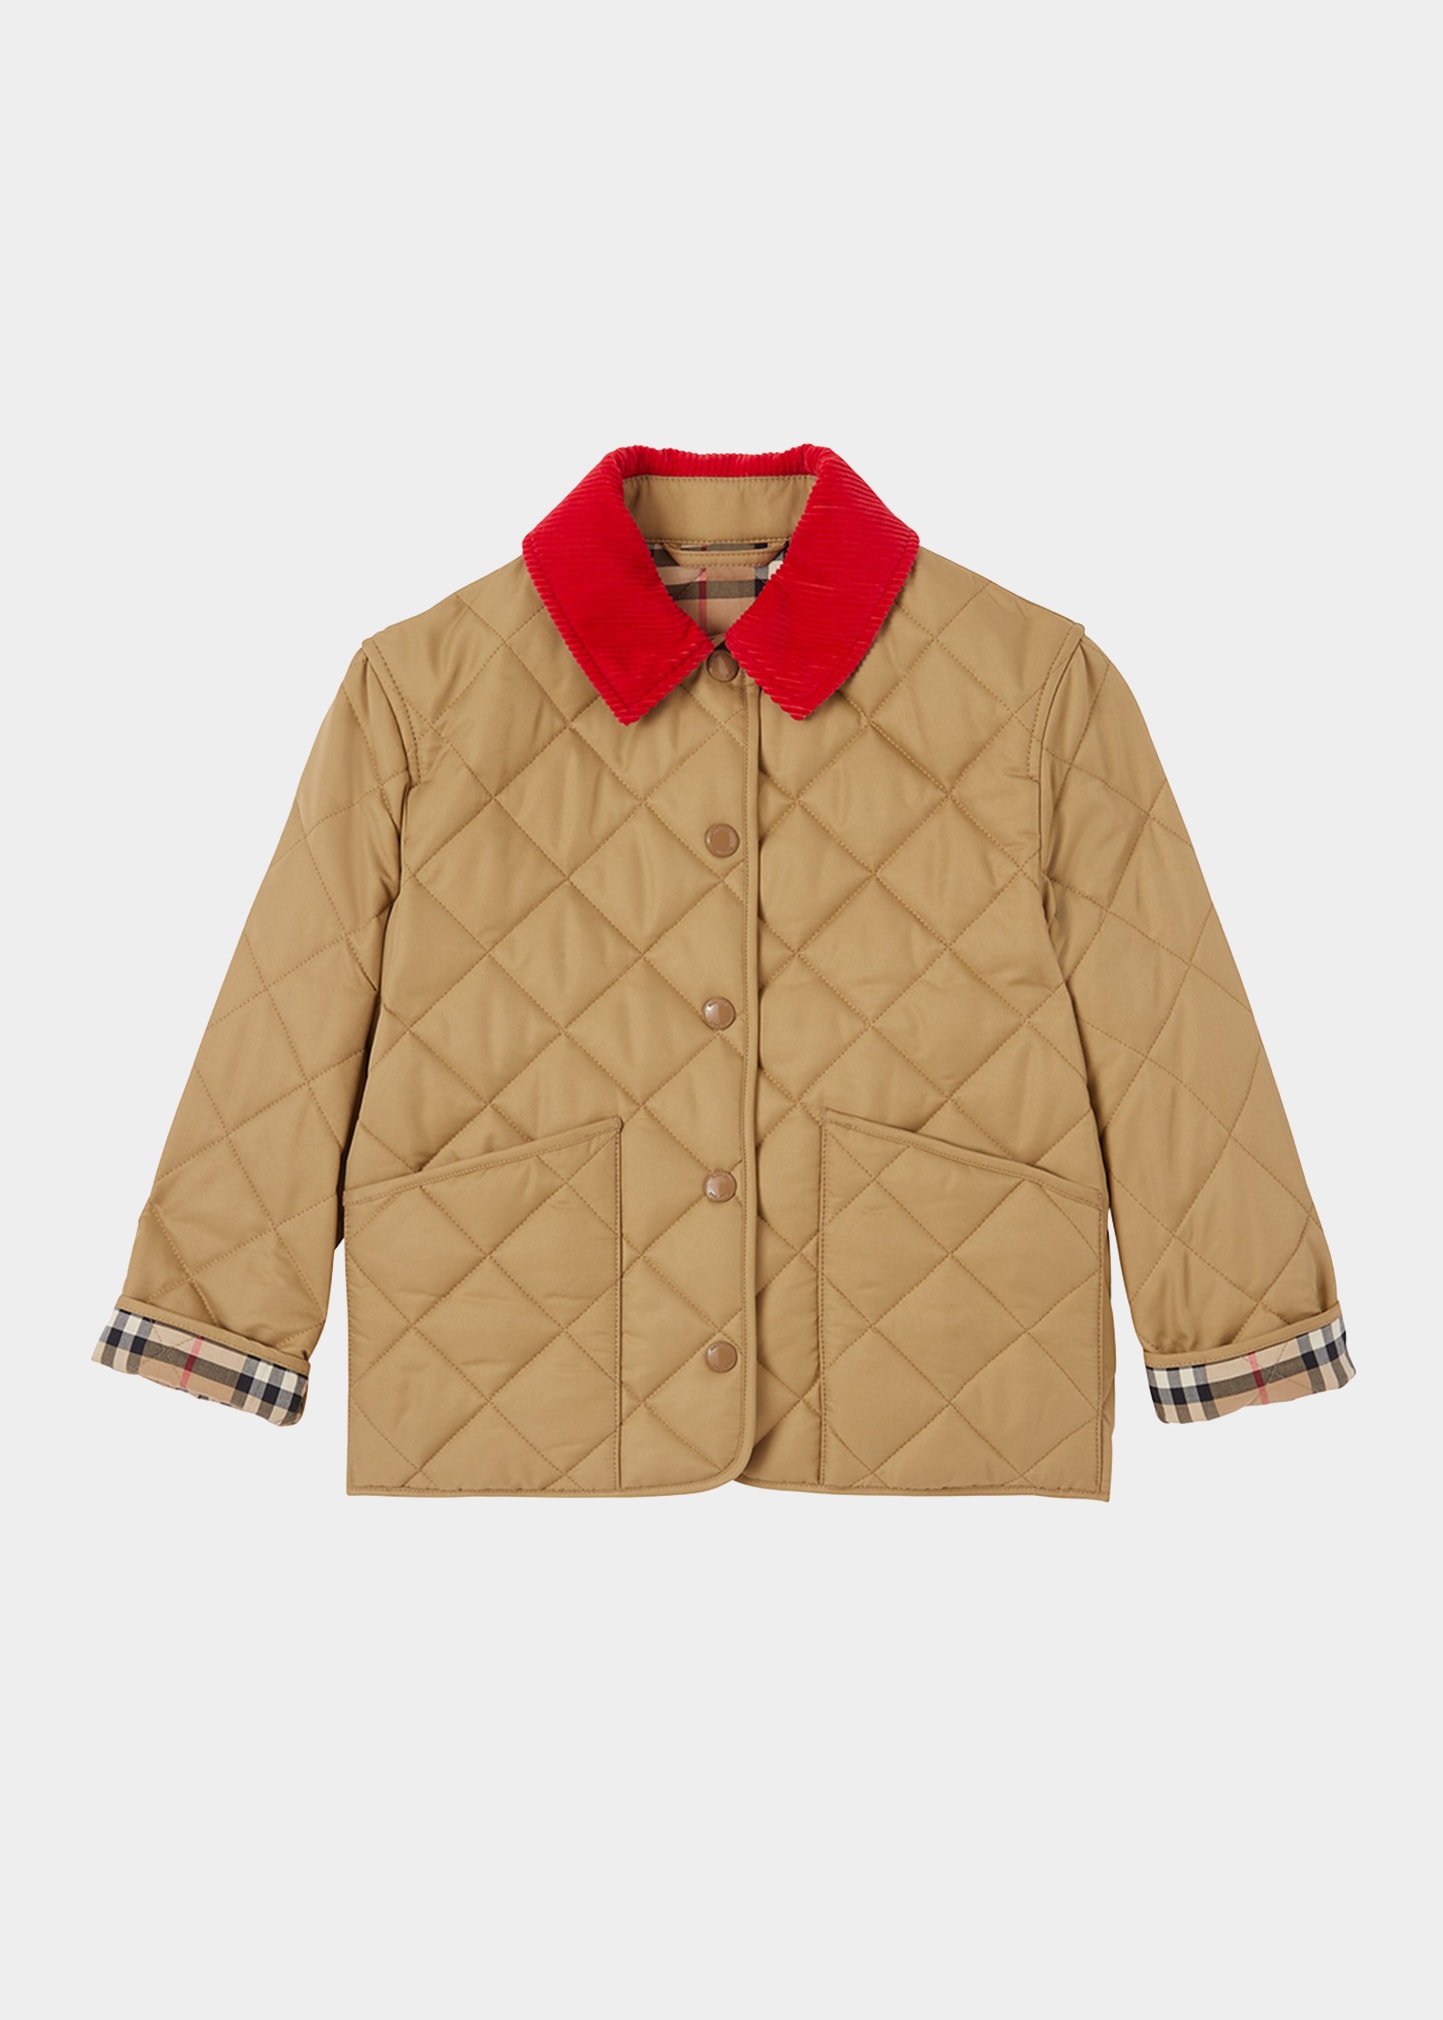 Burberry Kid's Daley Diamond Quilted Jacket, Size 3-14